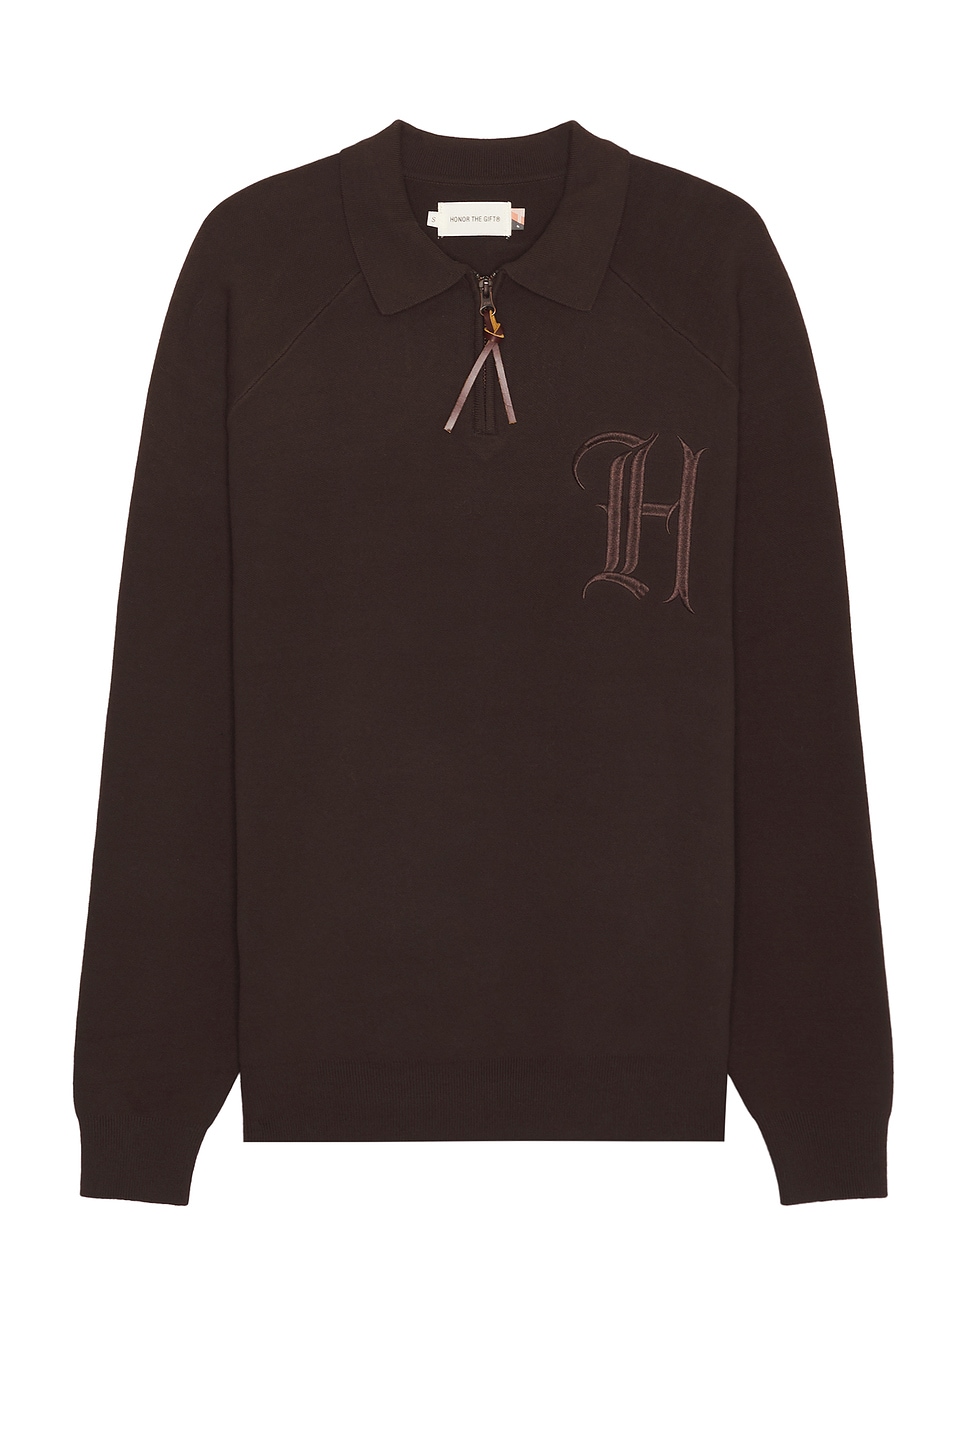 Image 1 of Honor The Gift Zip Henley Sweater in Brown